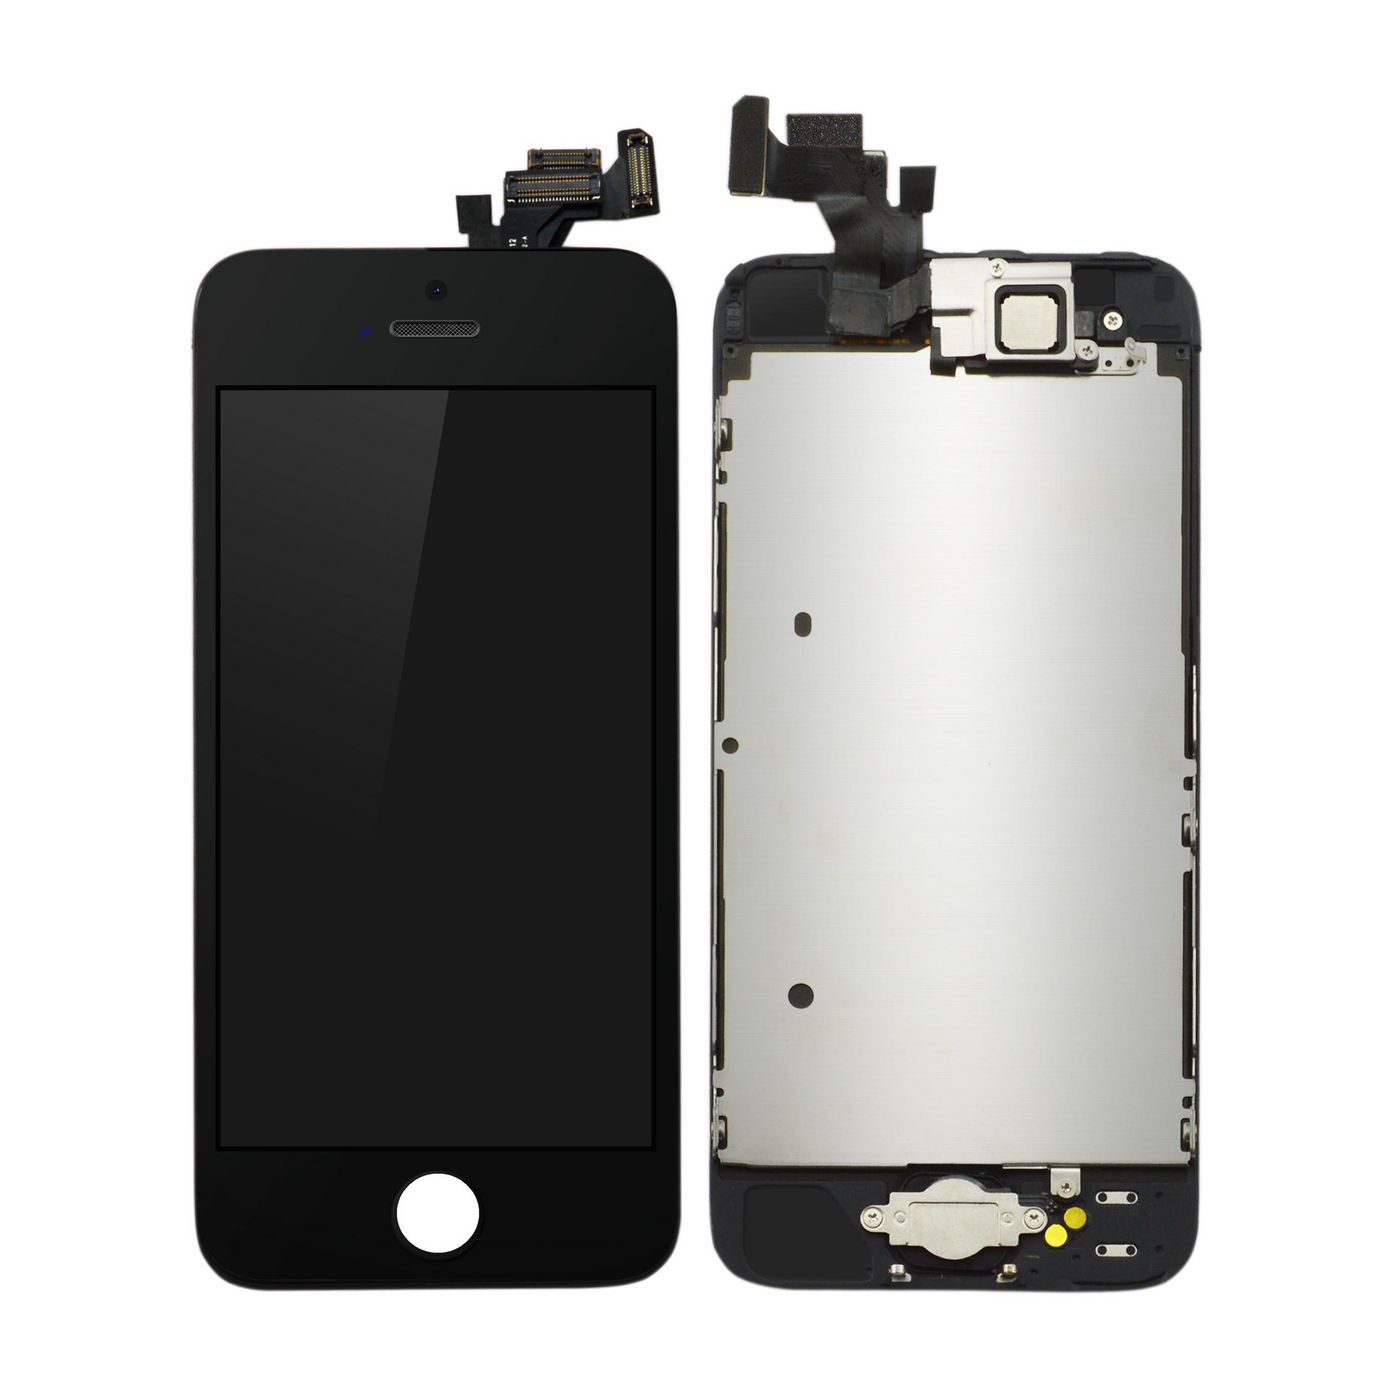 CoreParts MOBX-DFA-IPO5-LCD-B LCD for iPhone 5 Black 